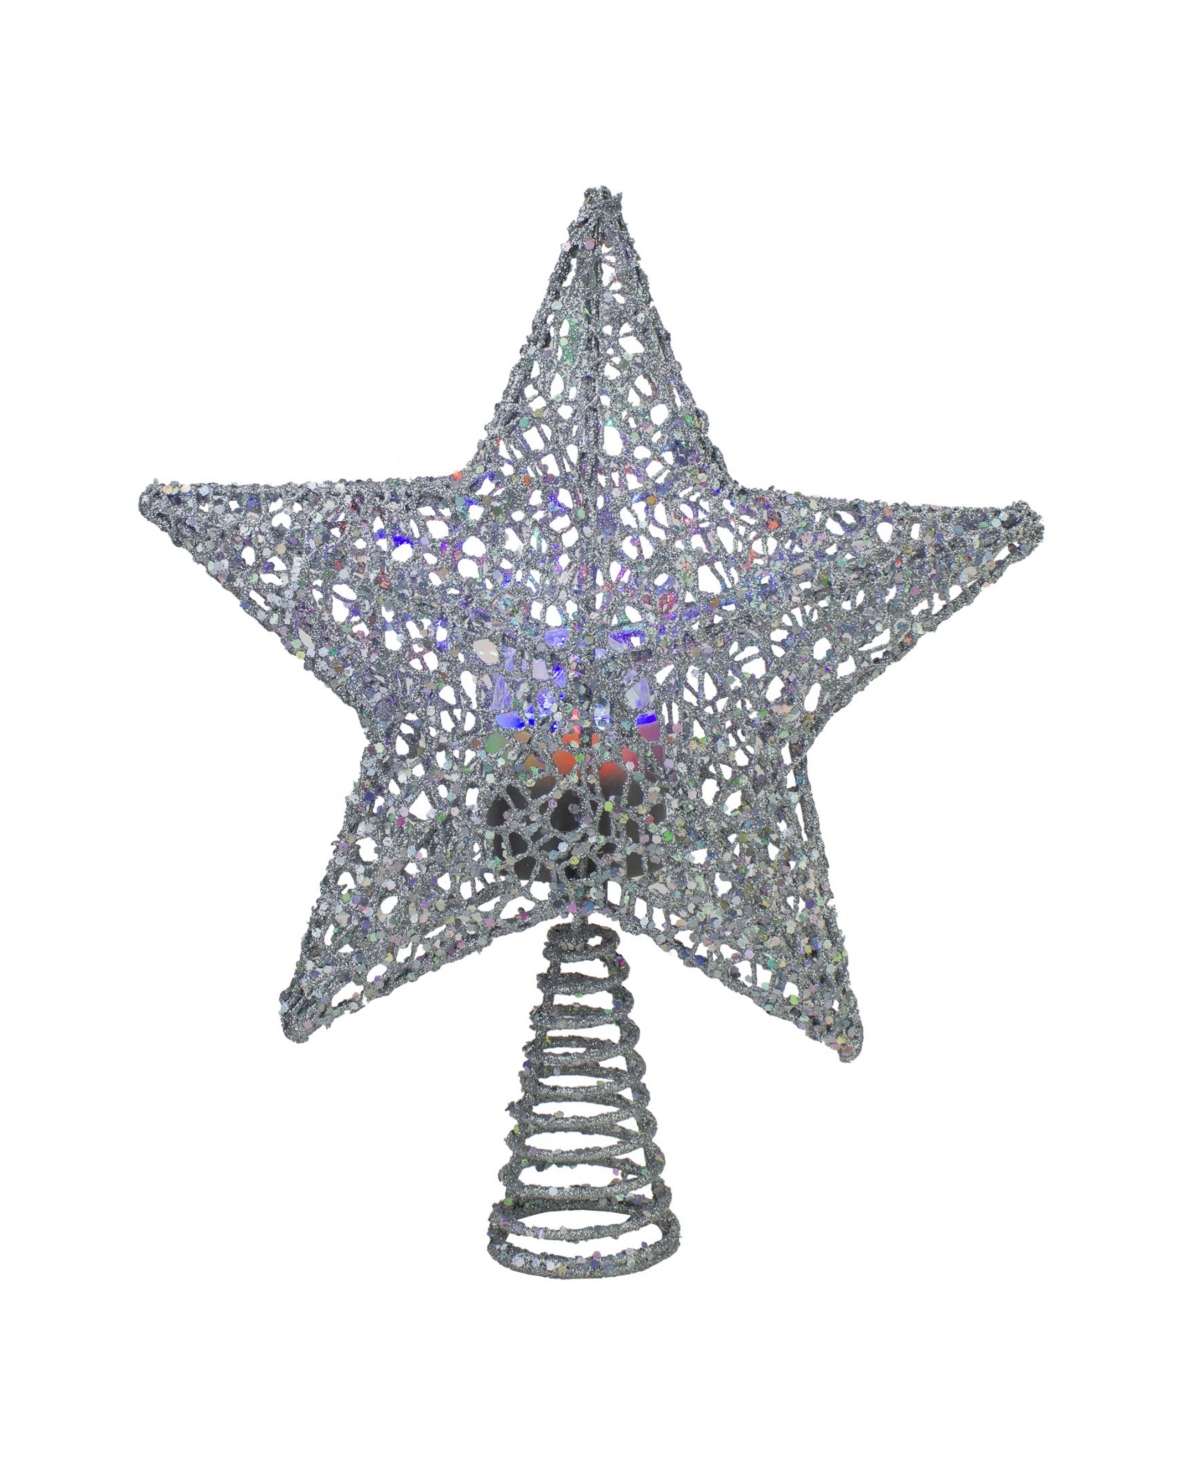 Lighted Star with Rotating Projector Christmas Tree Topper - Silver